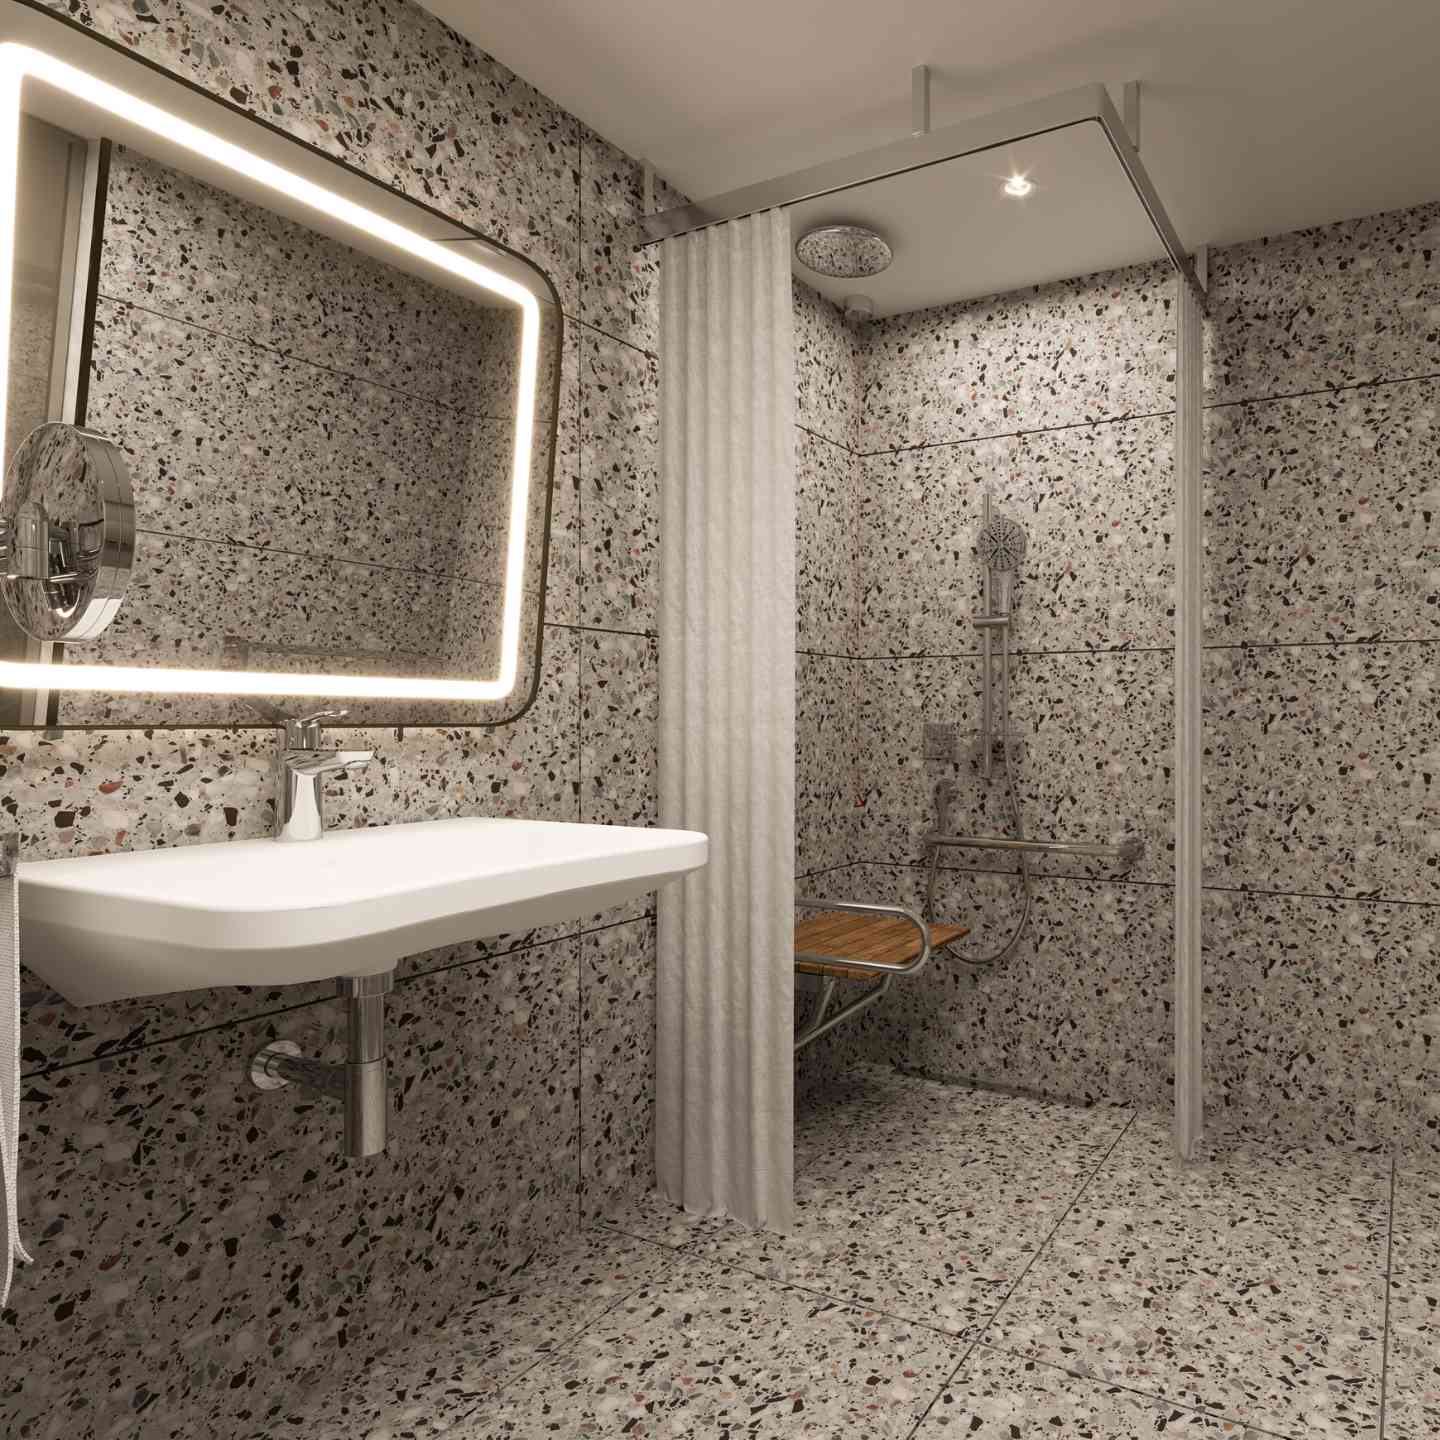 Angled view of a large white sink, rectangular mirror, and large walk-in shower in the background